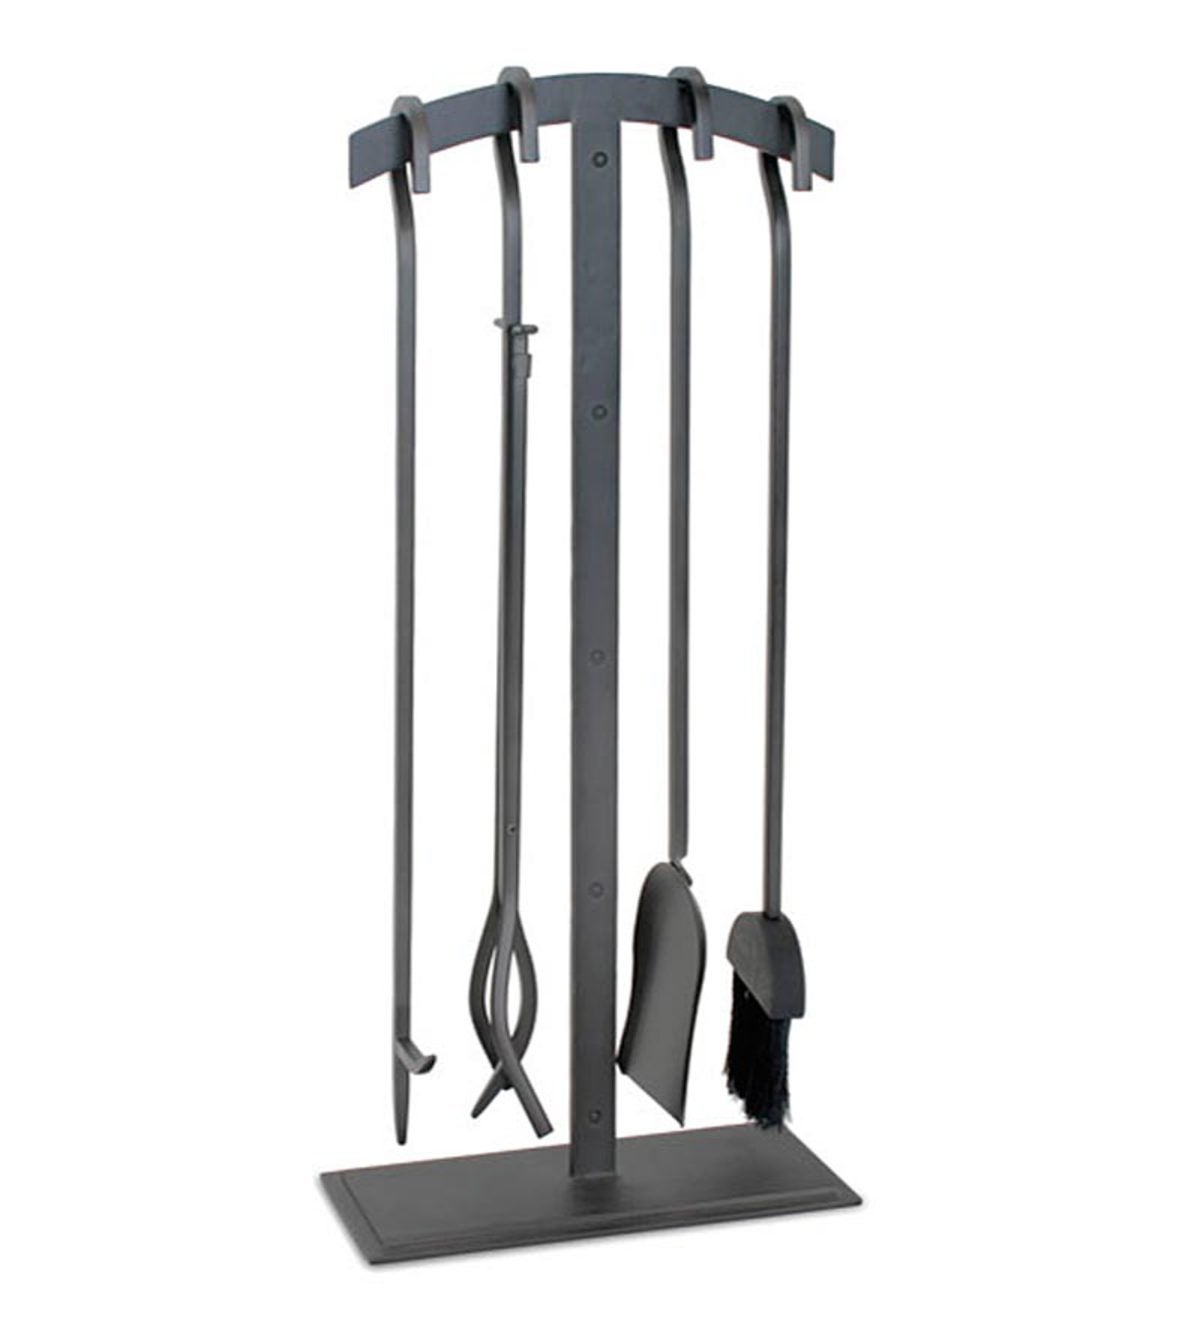 Shadow Iron 4-Piece Fireplace Tool Set in Natural Iron Finish